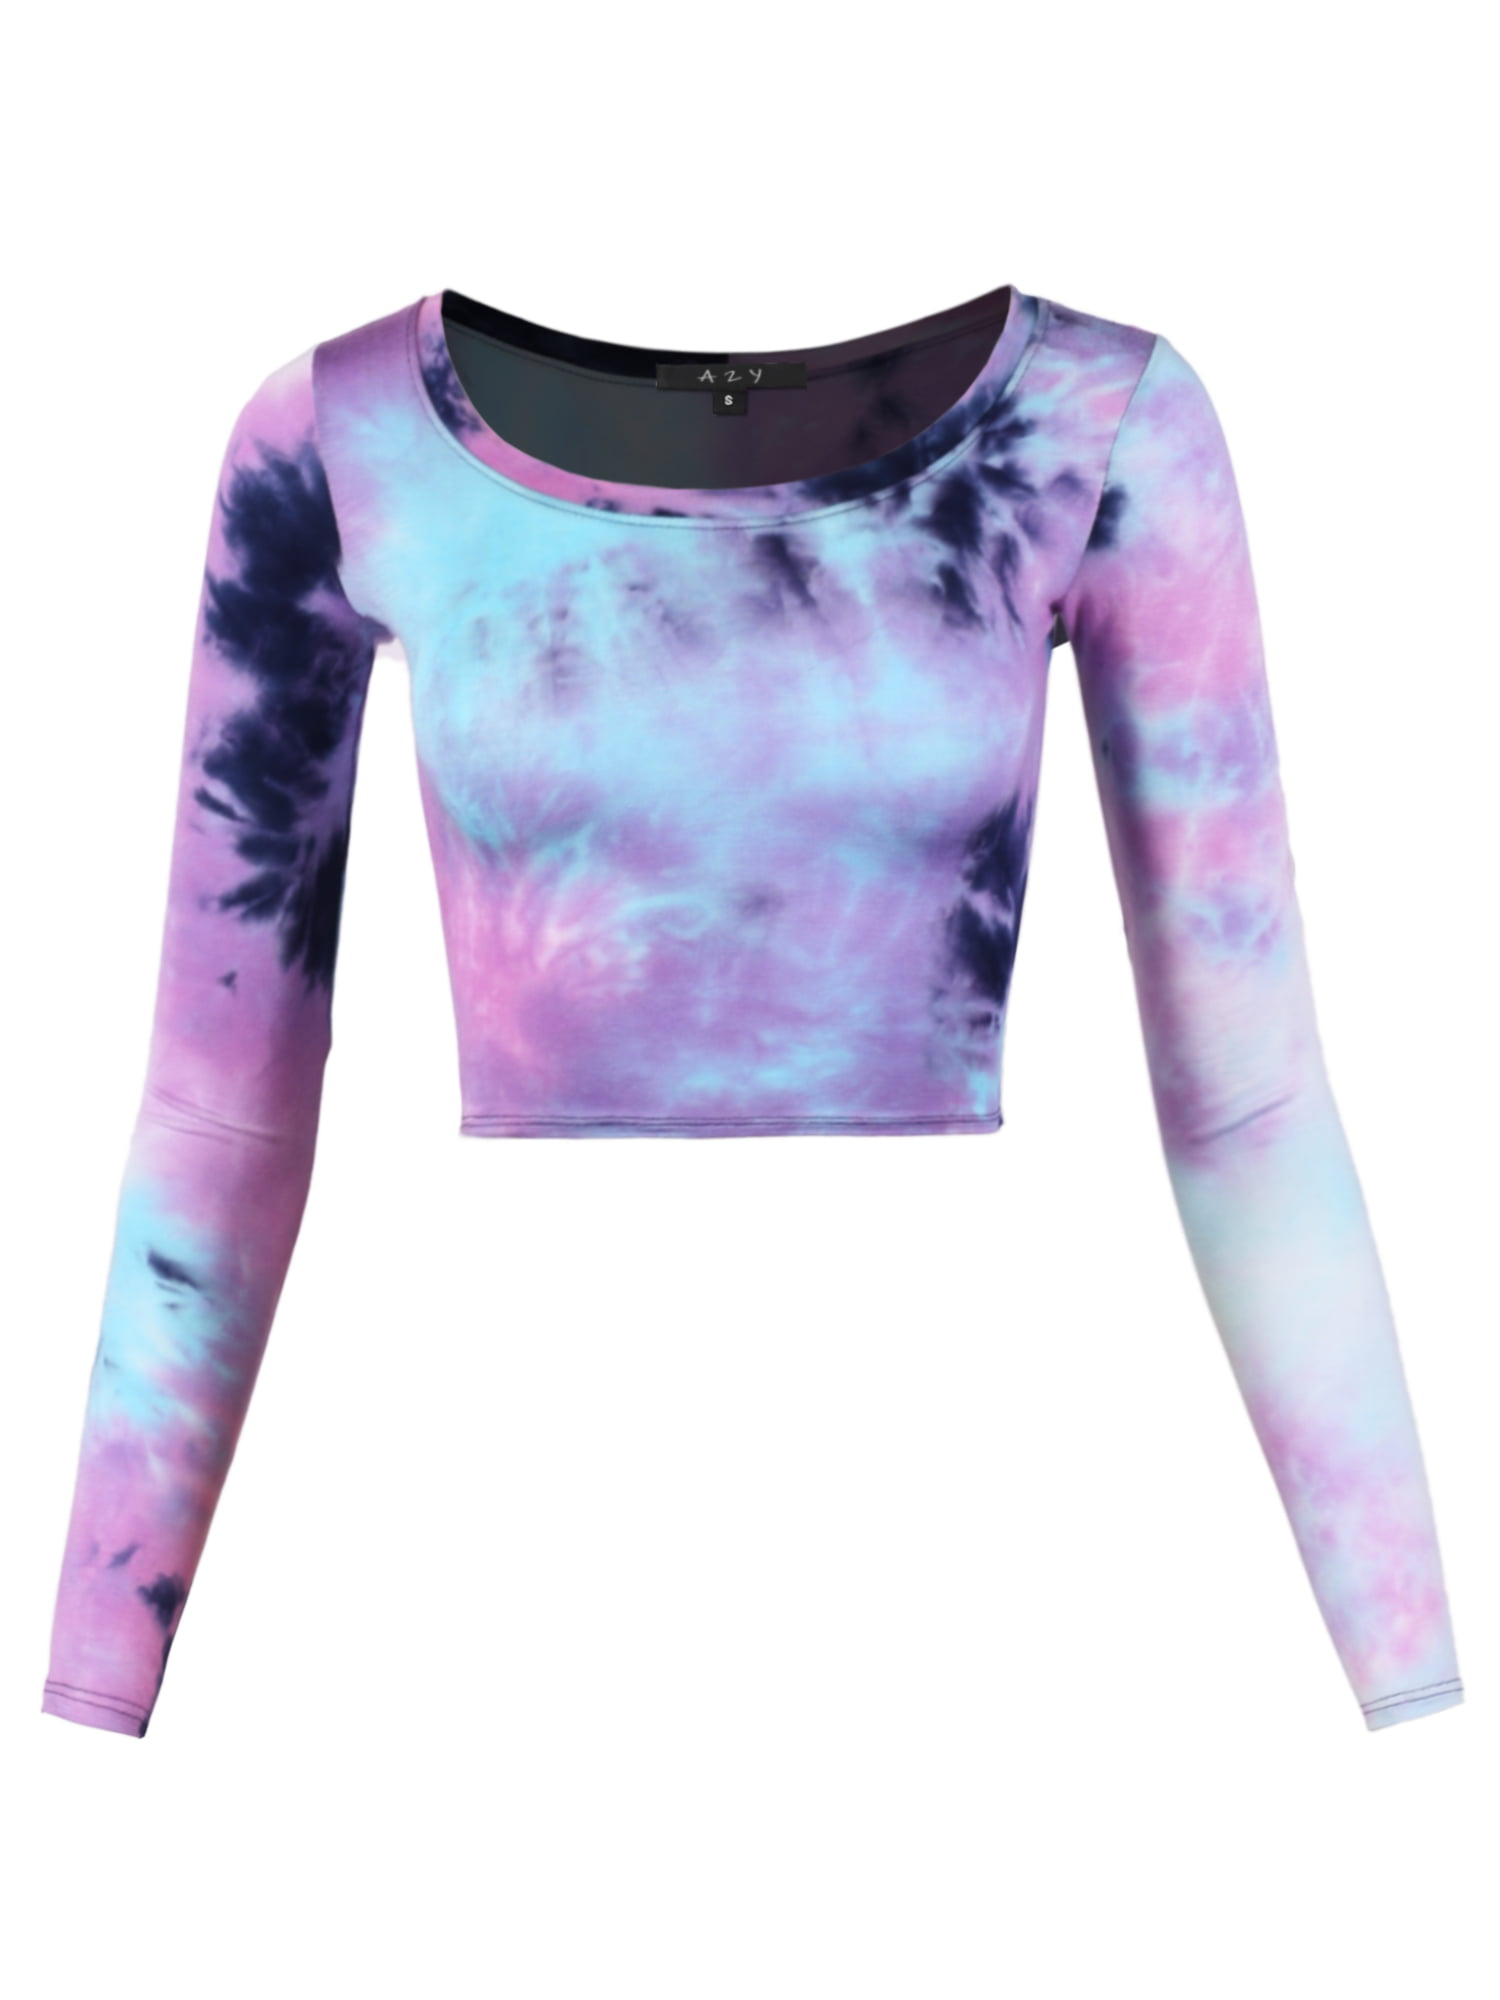 A2Y Women's Basic Solid Stretchable Scoop Neck Long Sleeve Crop Top Tie-dye  Blue XL 